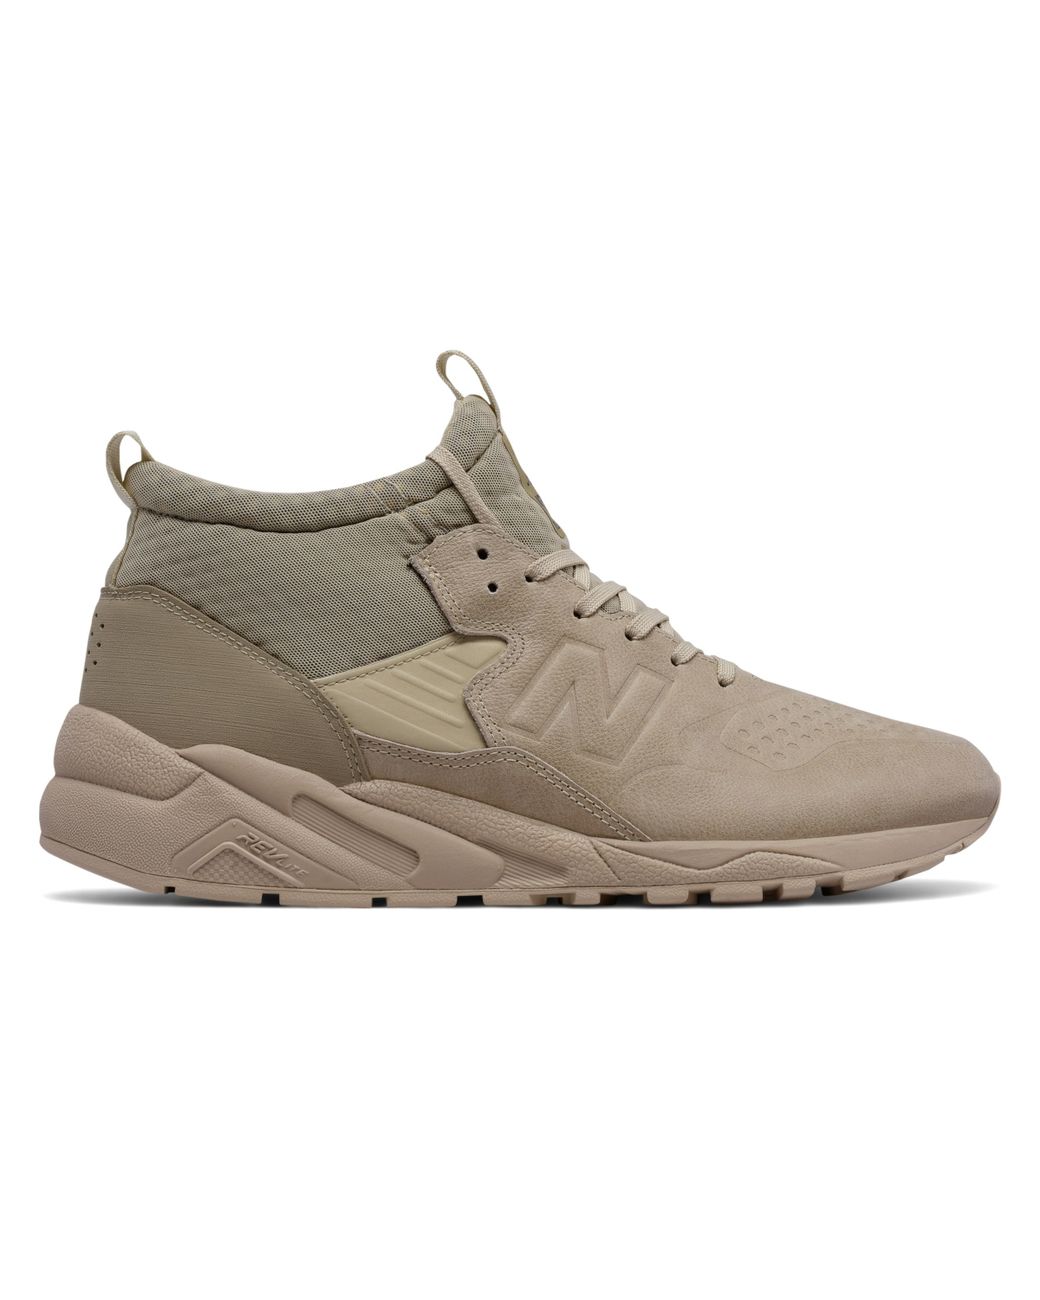 New Balance 580 Deconstructed Mid Sneaker Boots - Natural